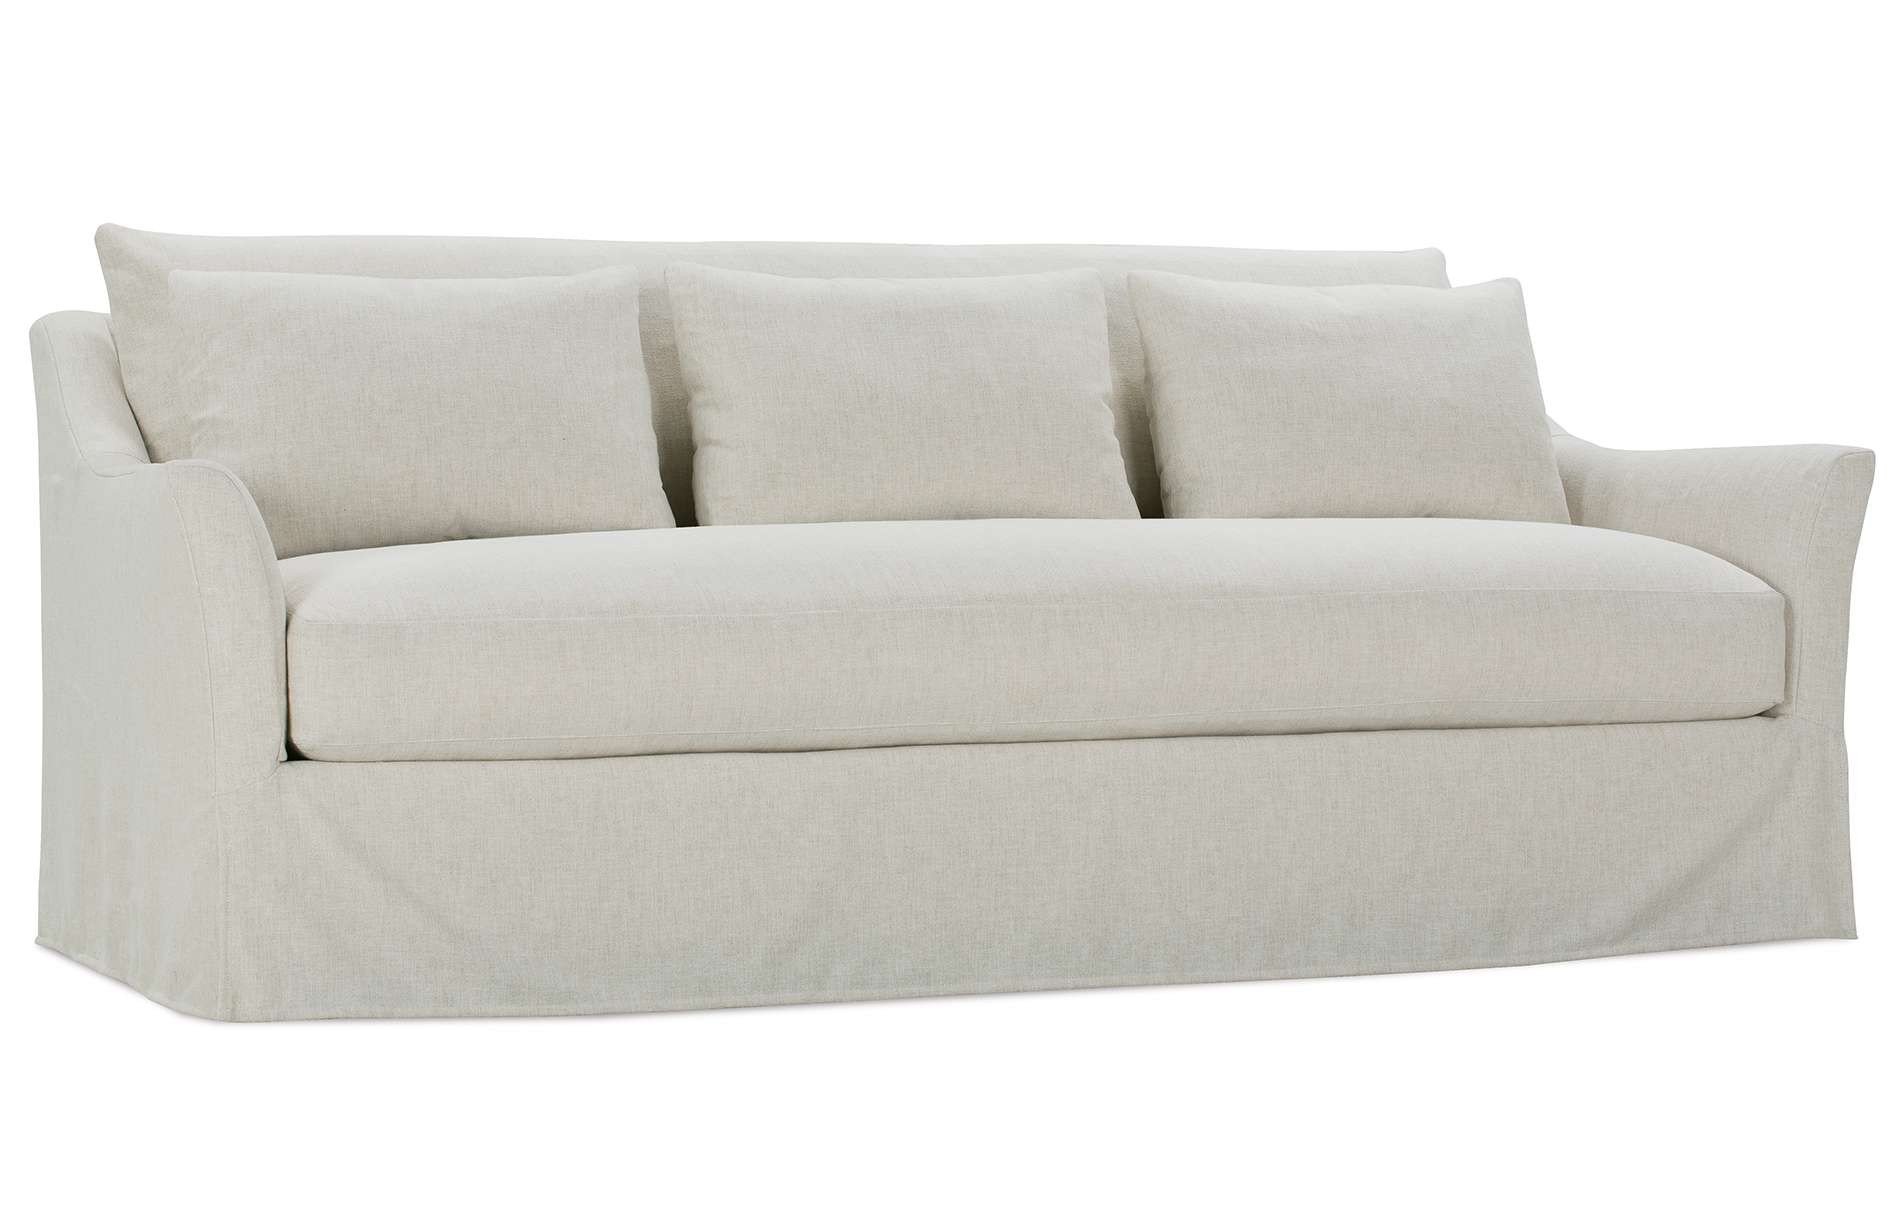 a white couch with four pillows on it